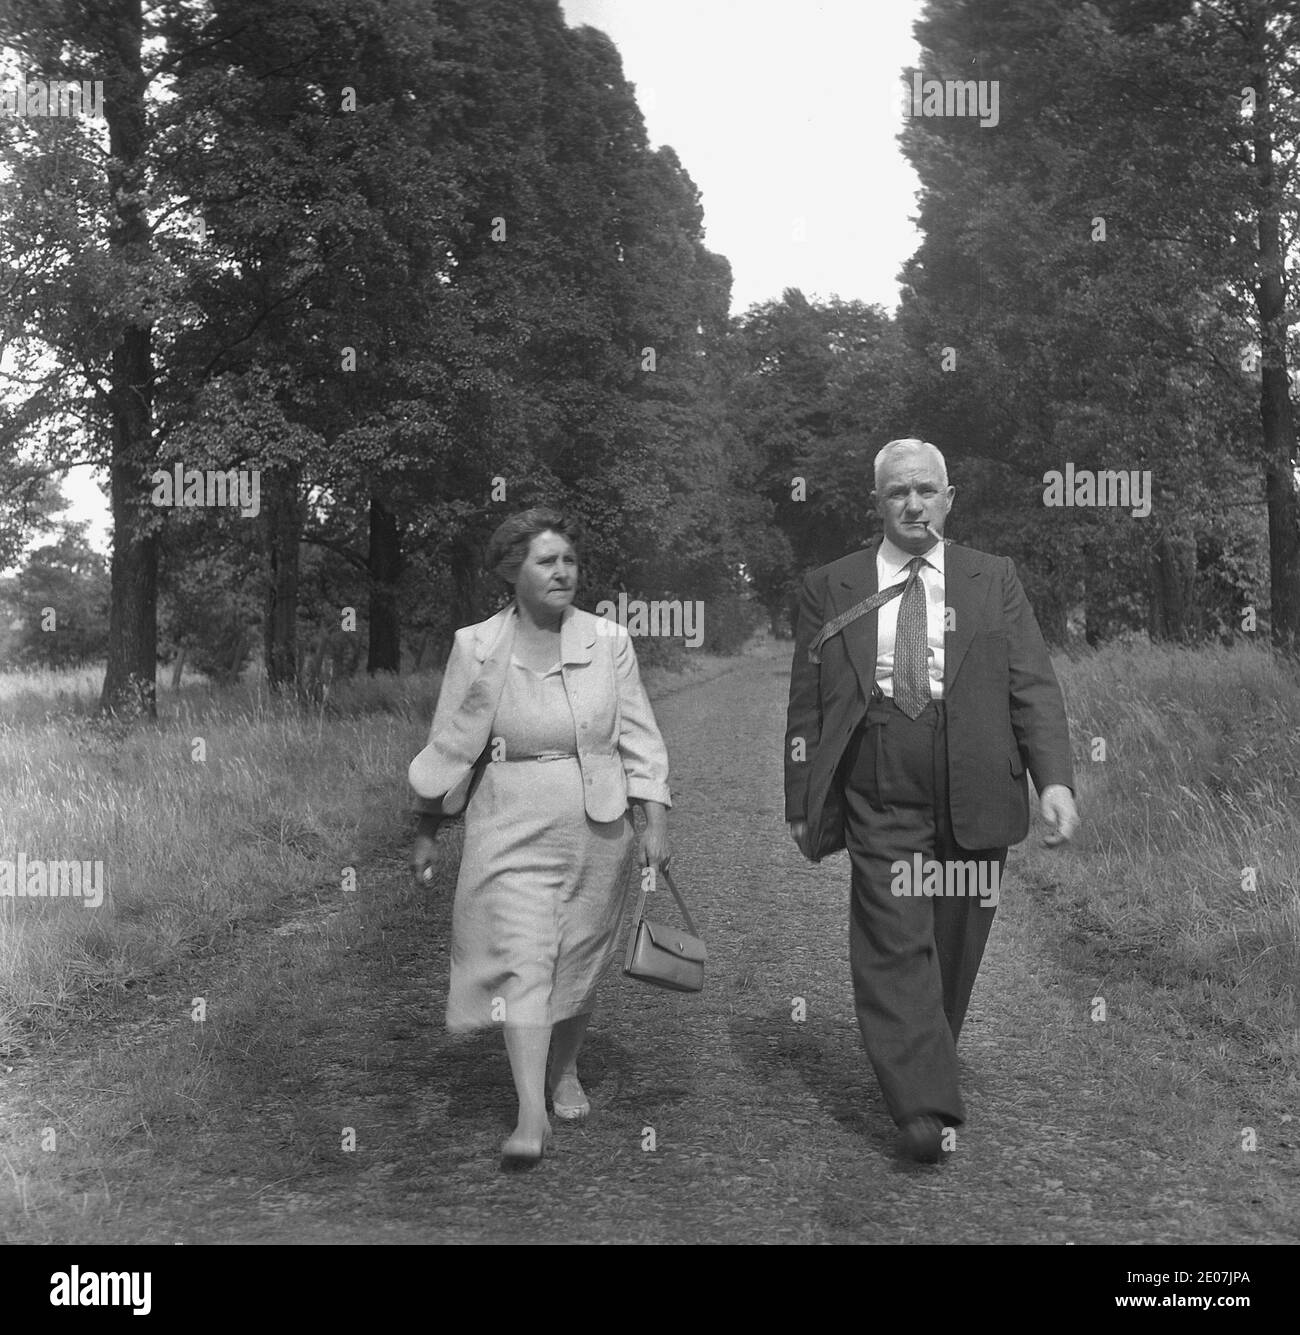 1950s, historical, a middle aged, well-dressed couple walking along a tree-lined grassy pathway in semi-rural parkland, England, UK. The gentleman is wearing a suit and tie and smoking a pipe, while the lady is carrying her handbag, perhaps they are taking a stroll after attending church or a civic function. Stock Photo